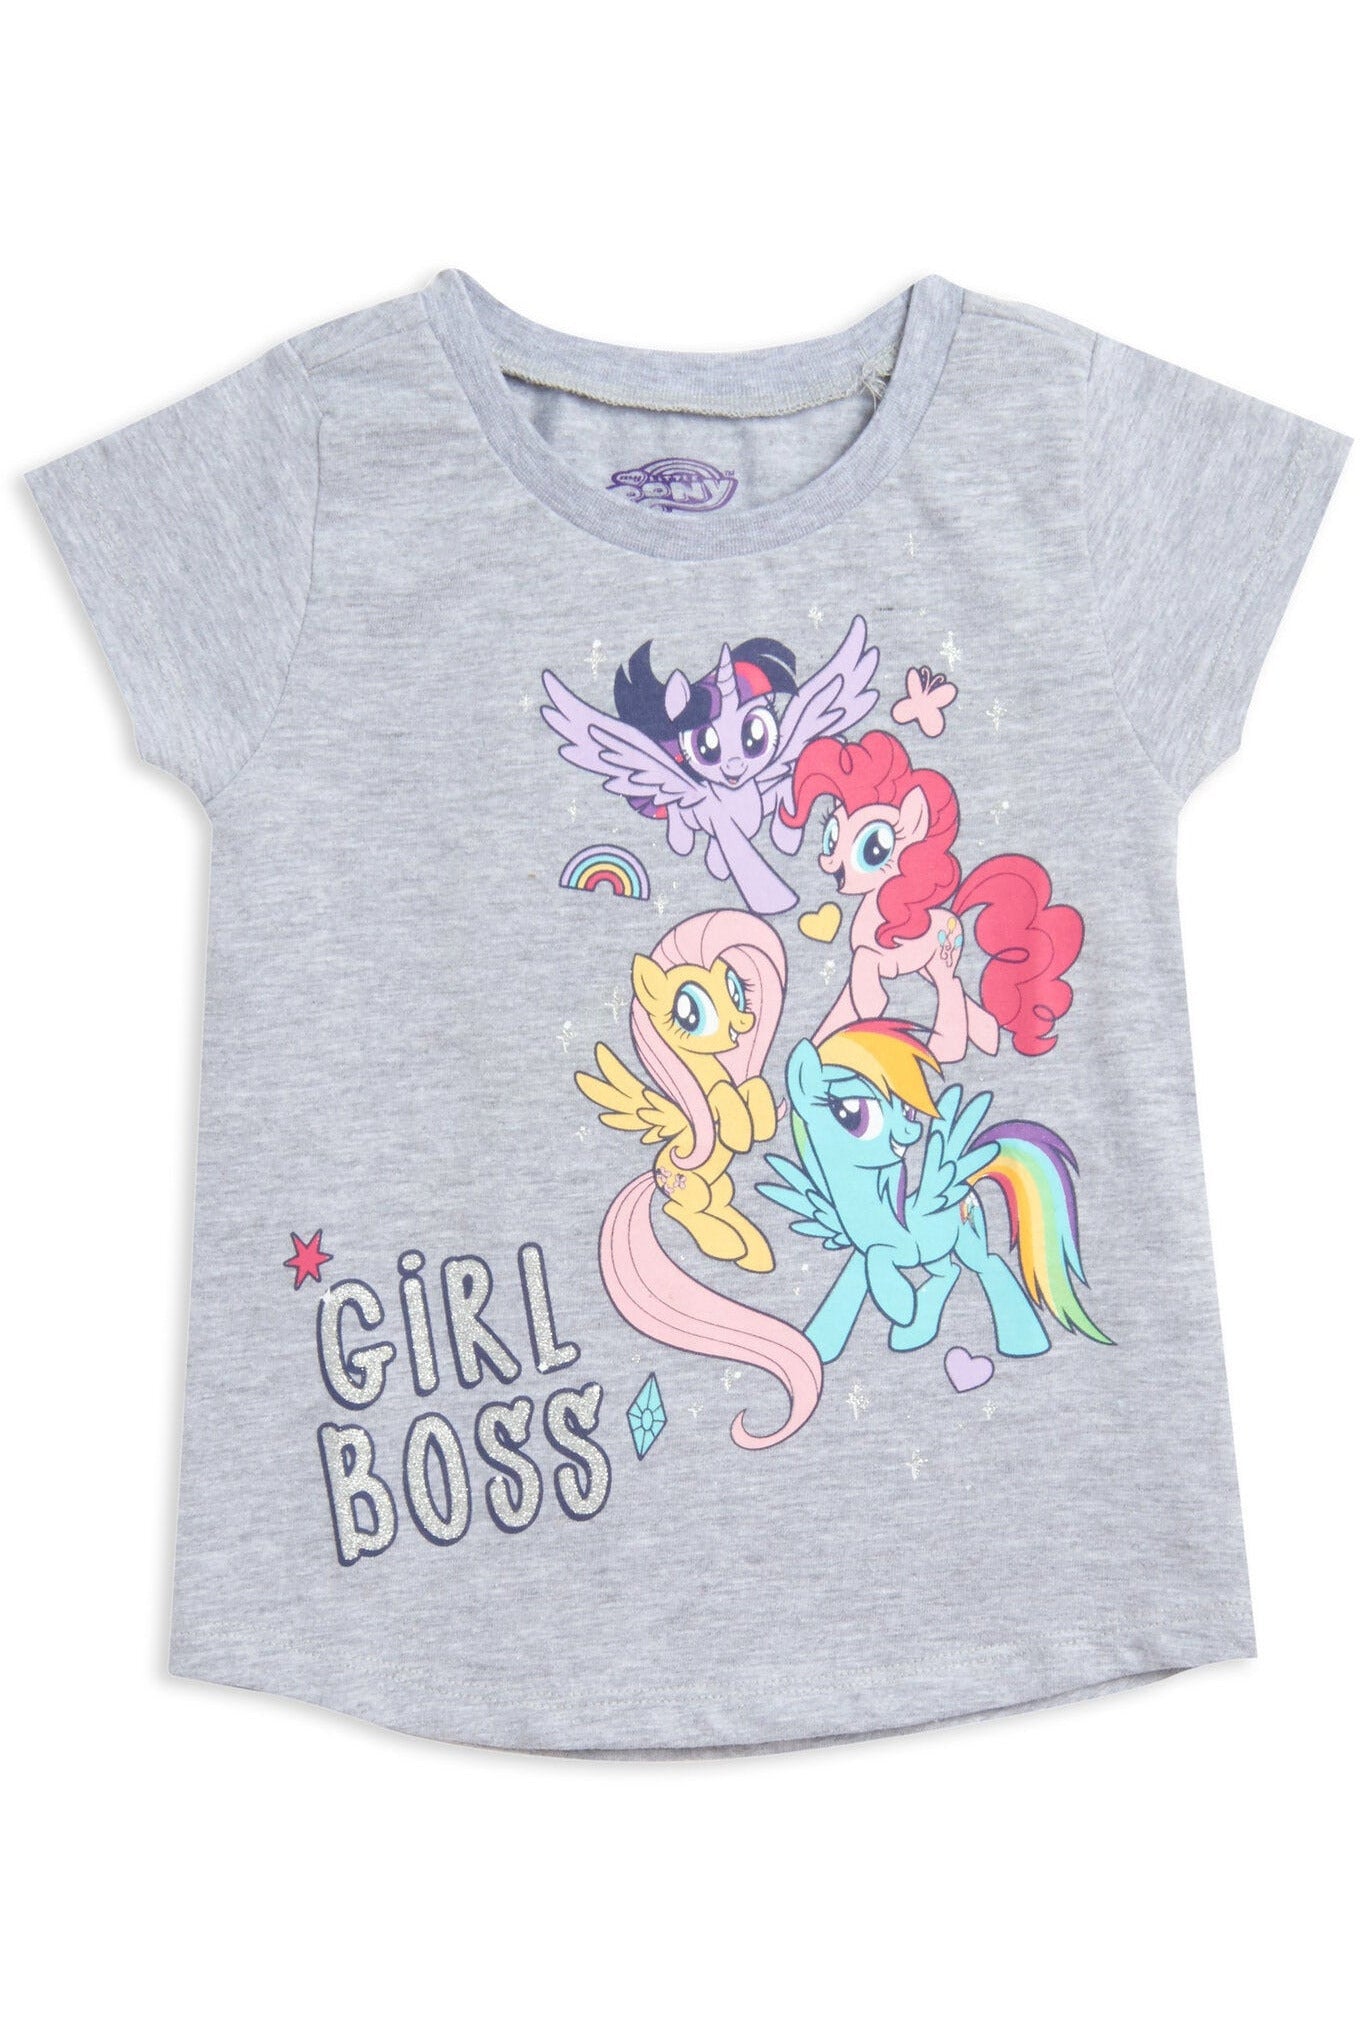 My Little Pony 3 Pack Graphic T-Shirt